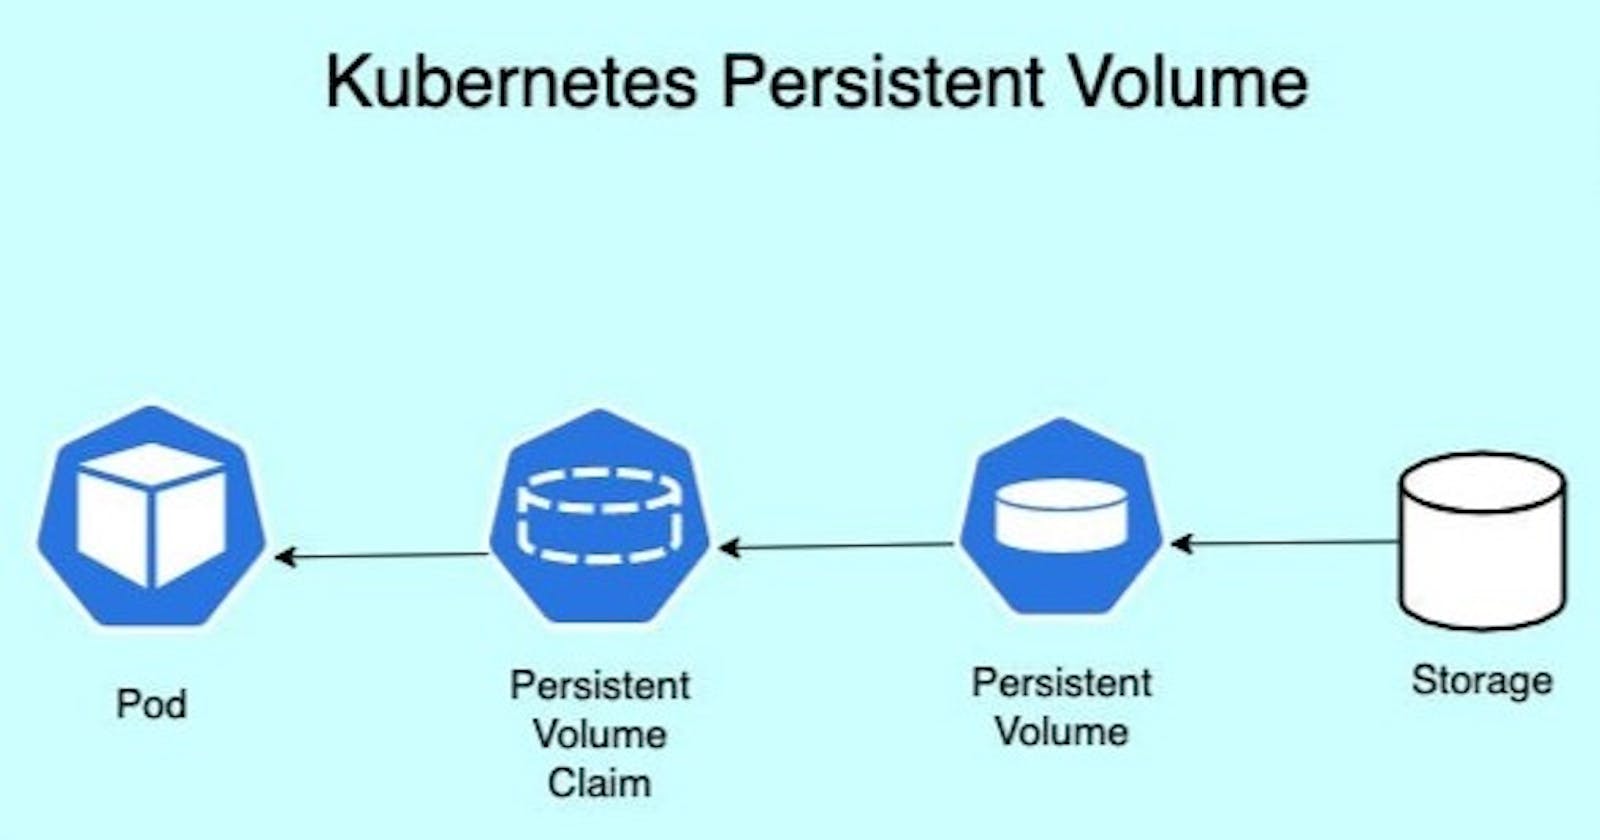 Day 36 - Persistent Volumes in K8s